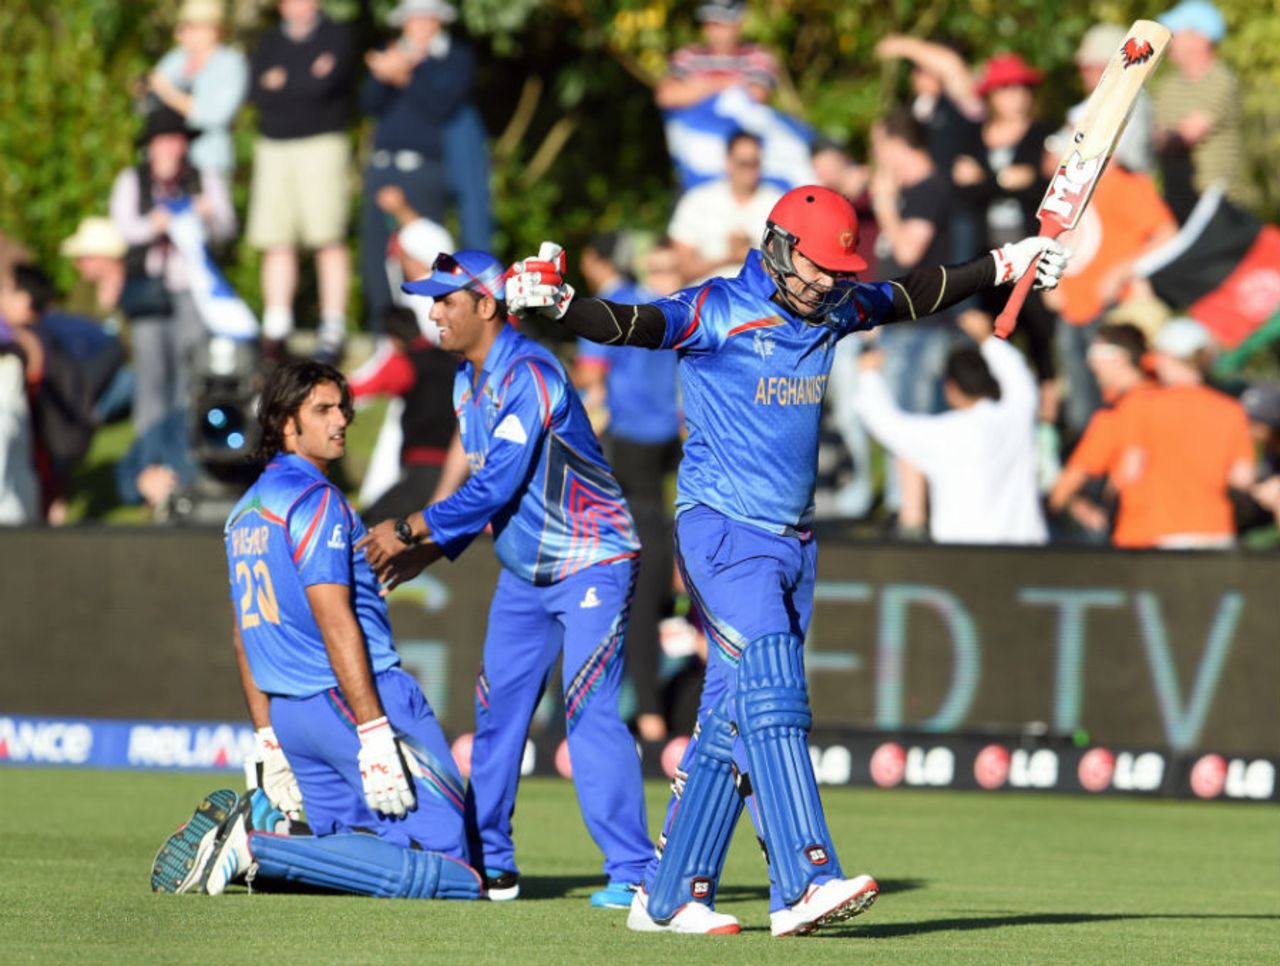 Hamid Hassan celebrates as Shapoor Zadran is down on his knees after winning,  Afghanistan v Scotland, World Cup 2015, Group A, Dunedin, February 26, 2015